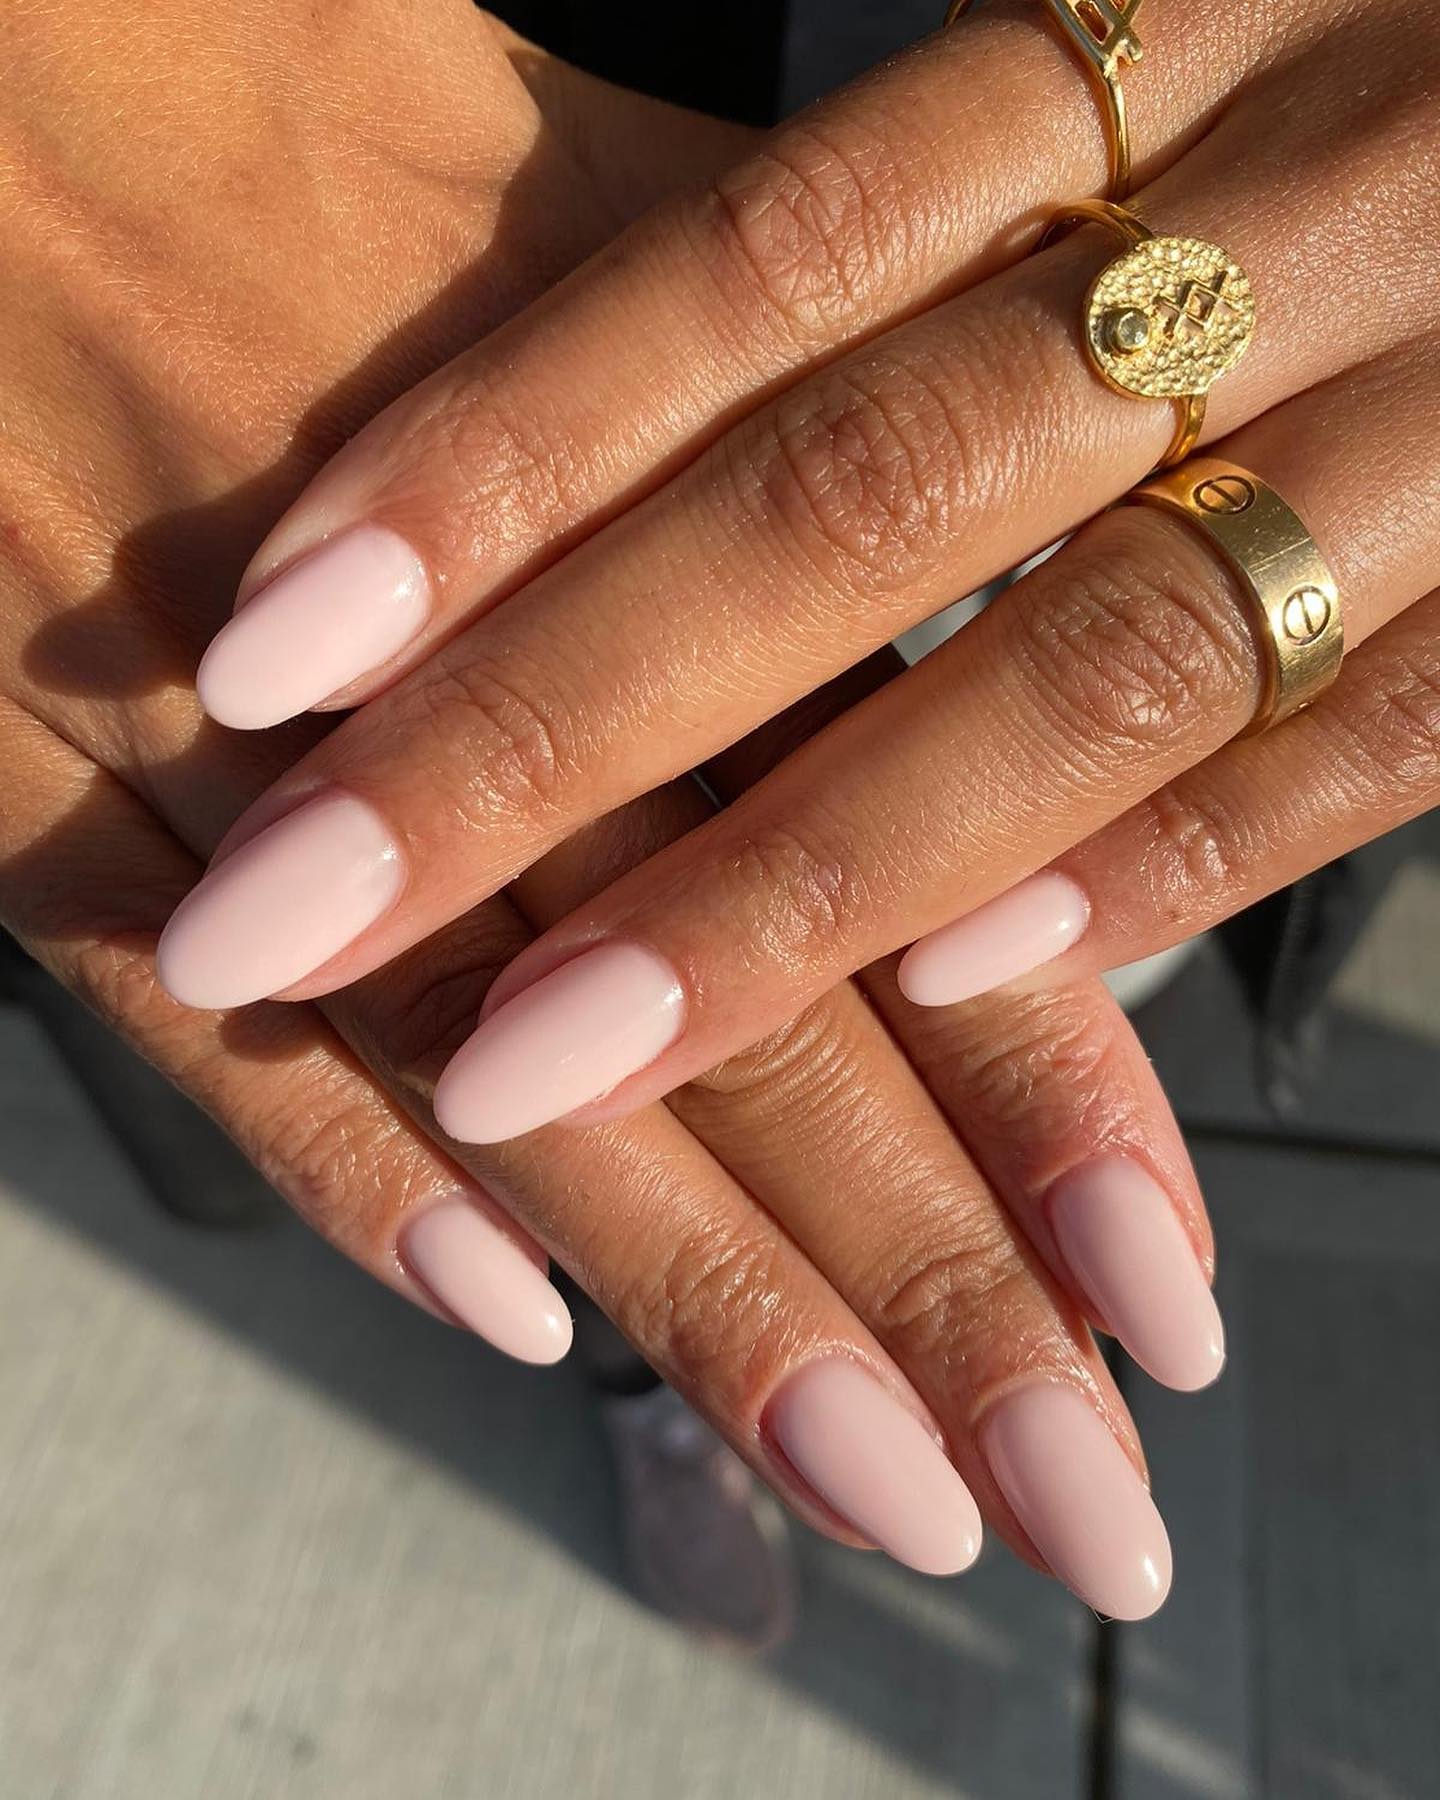 Sometimes the beauty can be found in simplicity and this might be the case for you, too. Wanna look fabulous and simple at the same time? Then, go for these nude manicure.